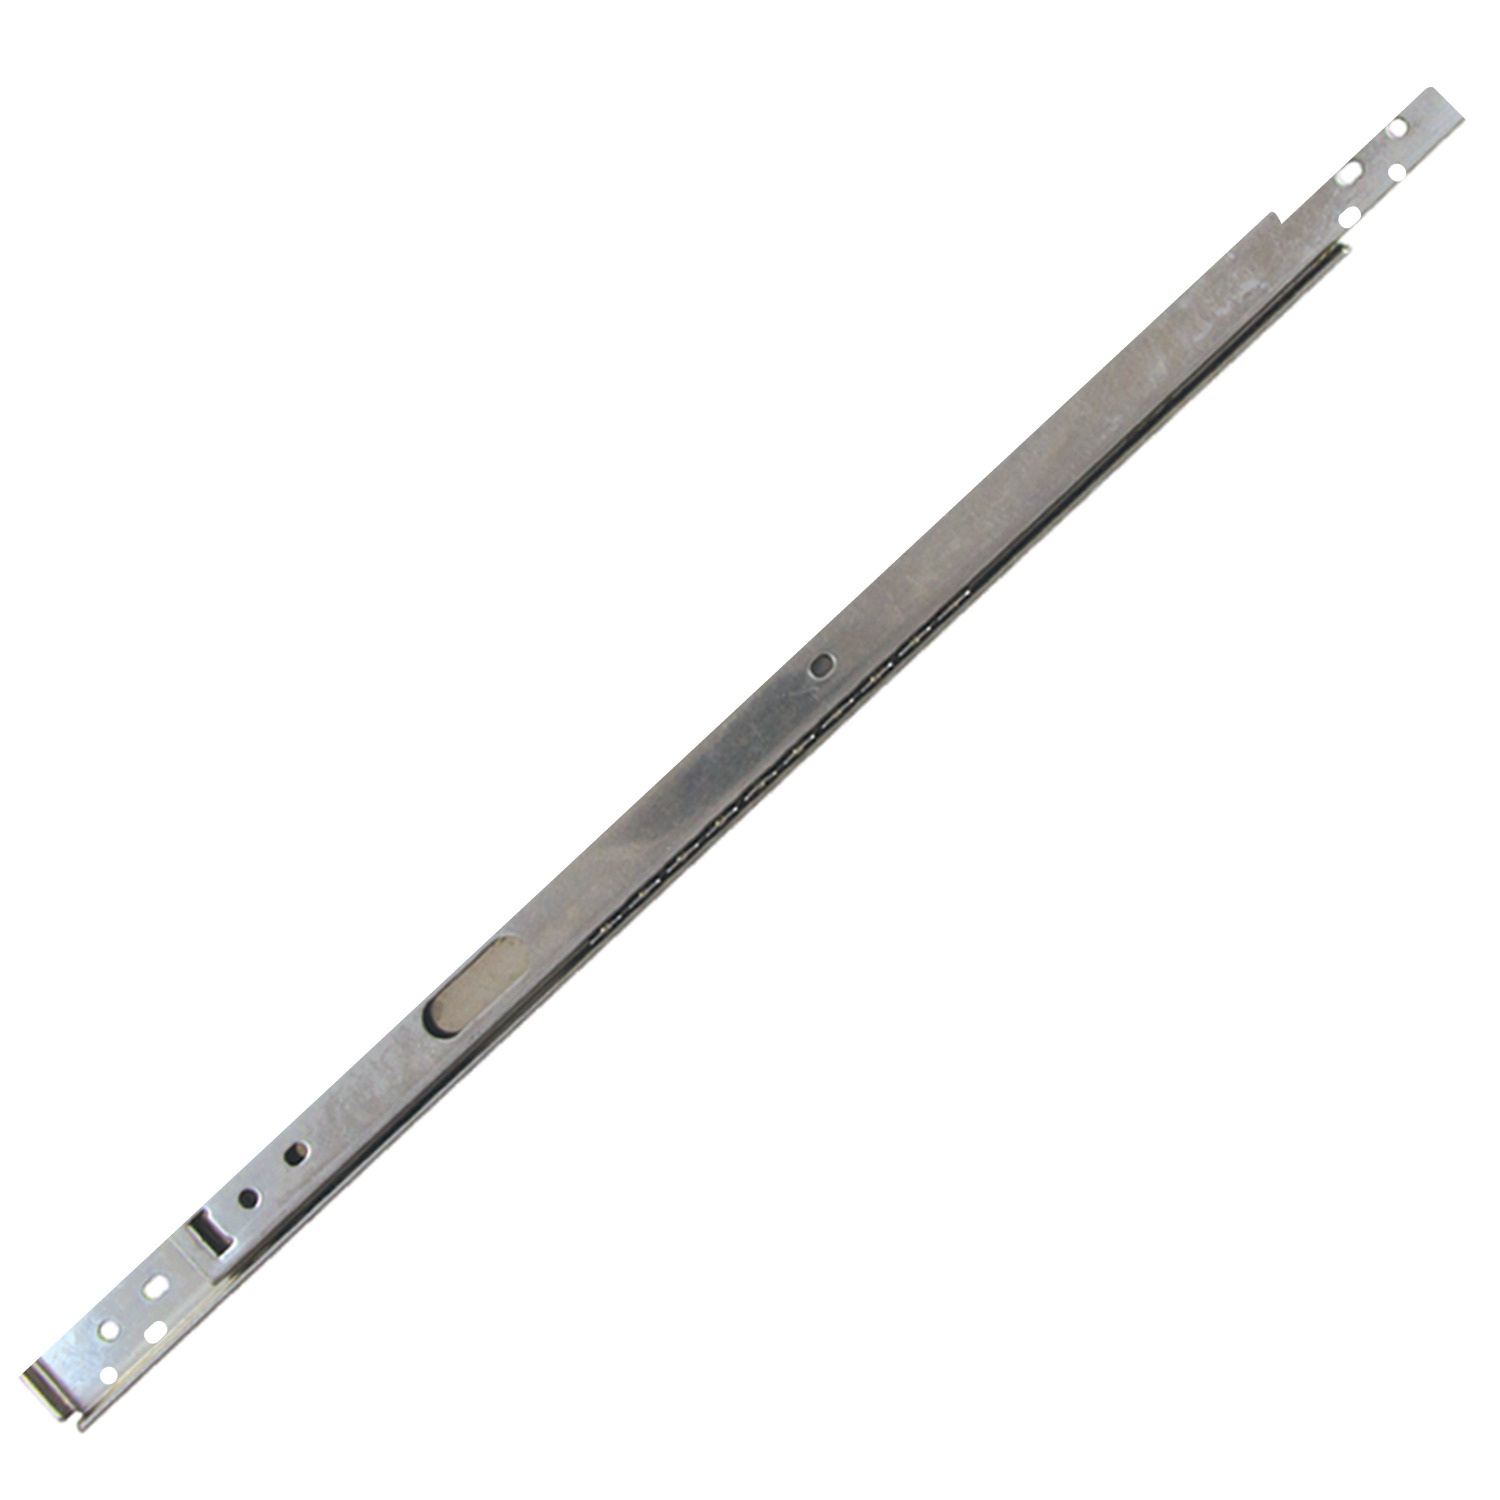 P7000.AC0250 Drawer Slide 3/4 Extn Length 250; Load 15kg per pair. Sold Individually. Stainless